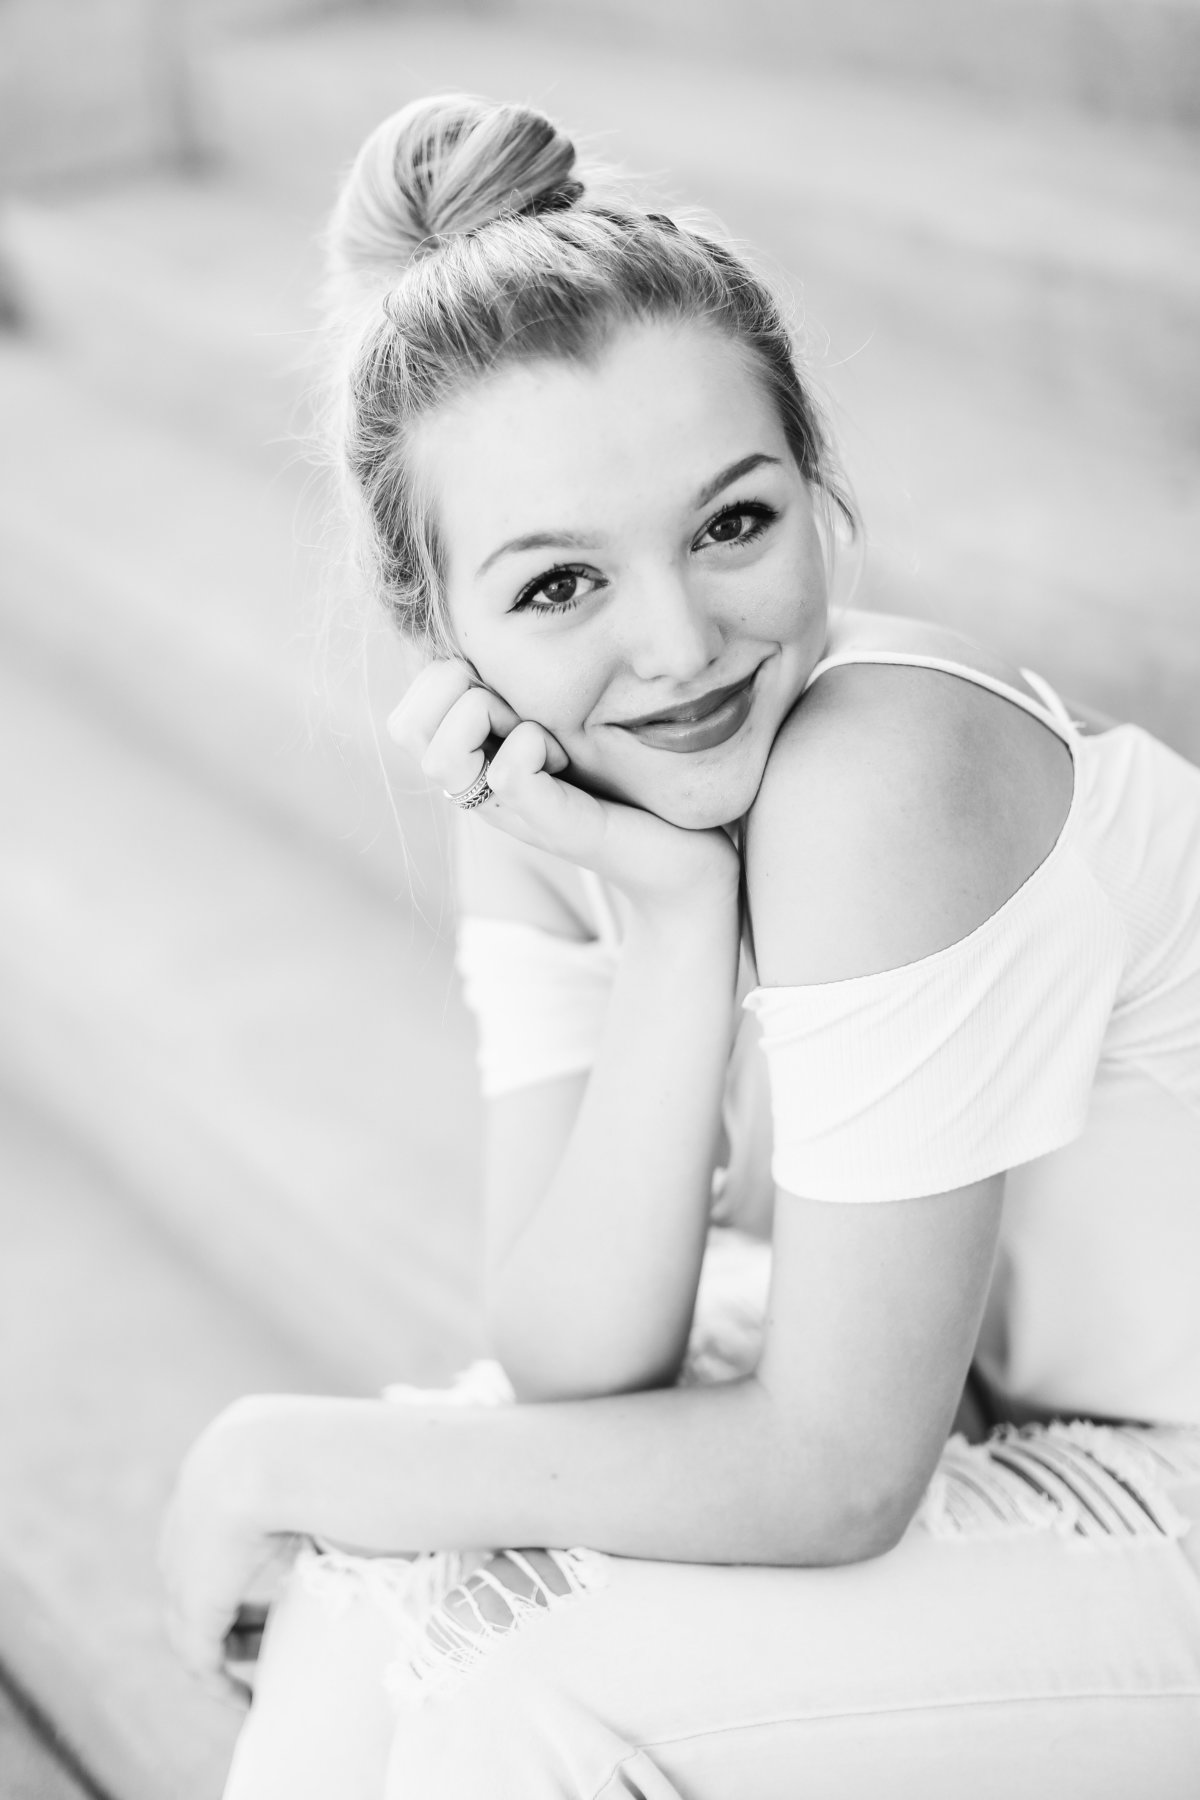 Black and white portrait of a girl sitting on steps smiling